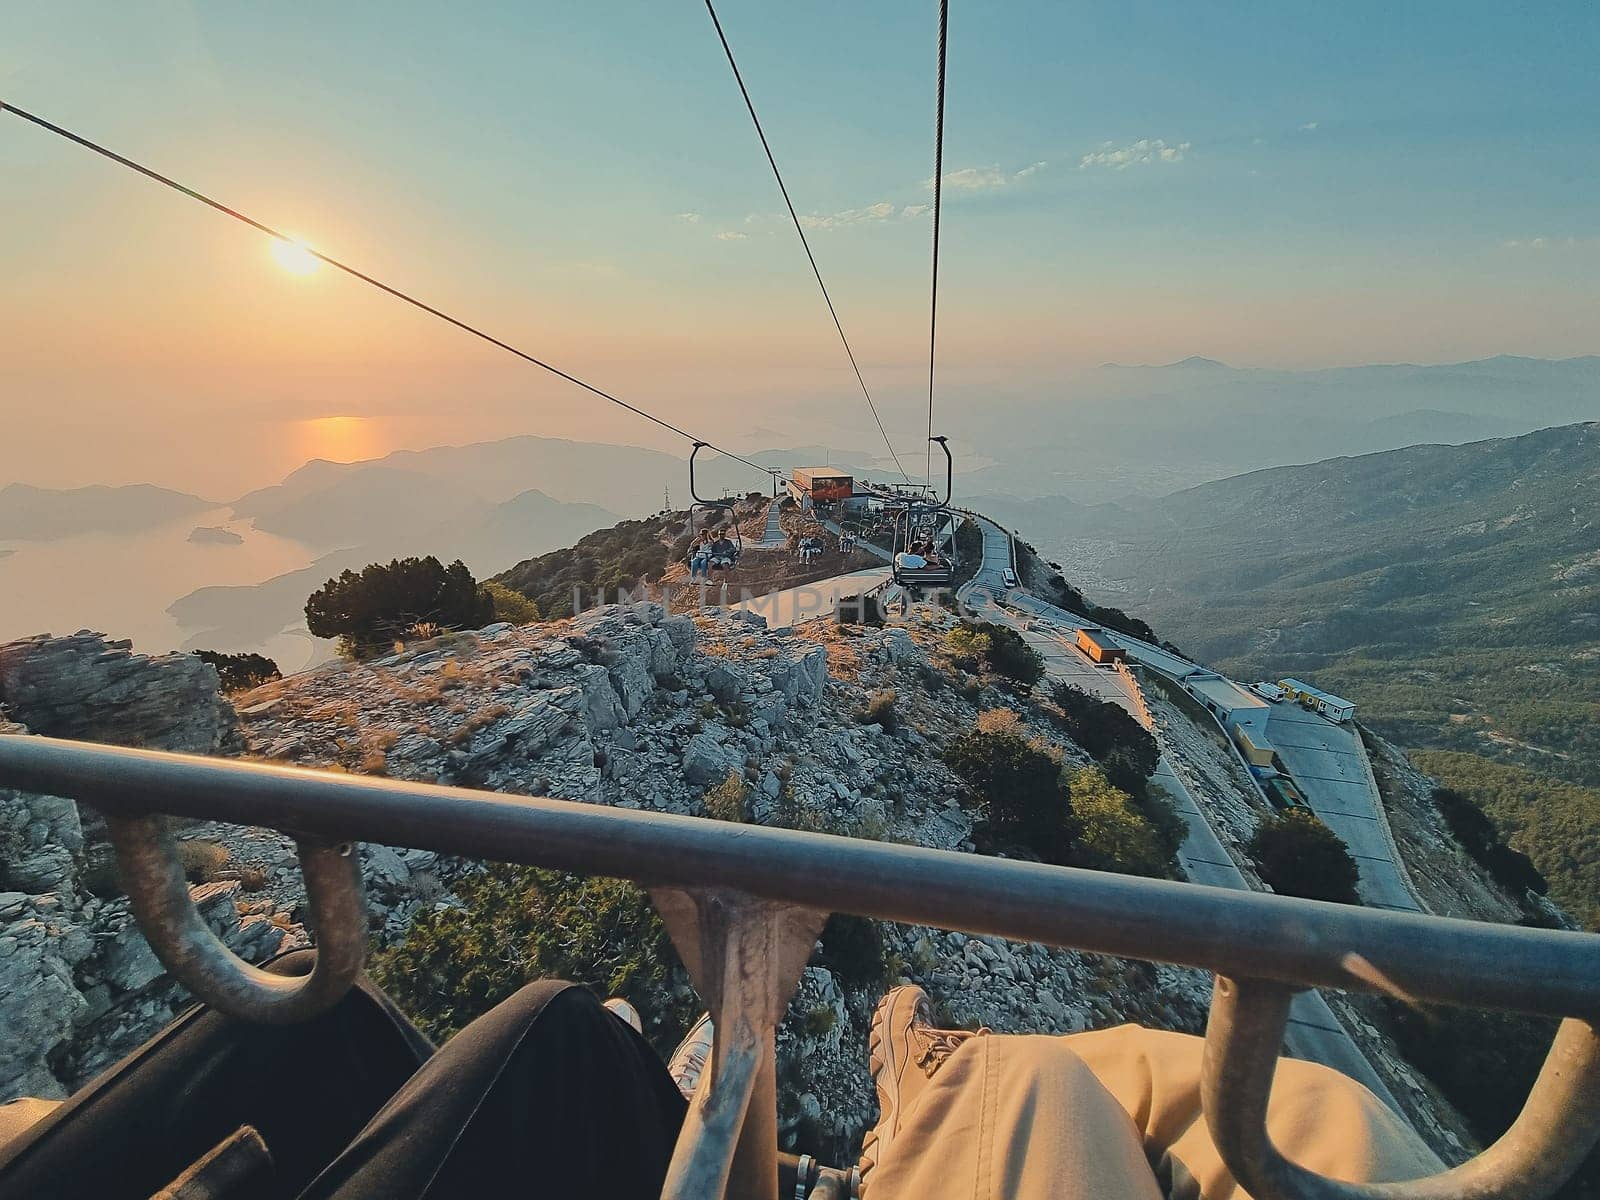 picturesque sunset in mountains on cable car. beautiful view of sea, mountains and setting sun. soft focus. concept of hiking, summer vacation by Leoschka